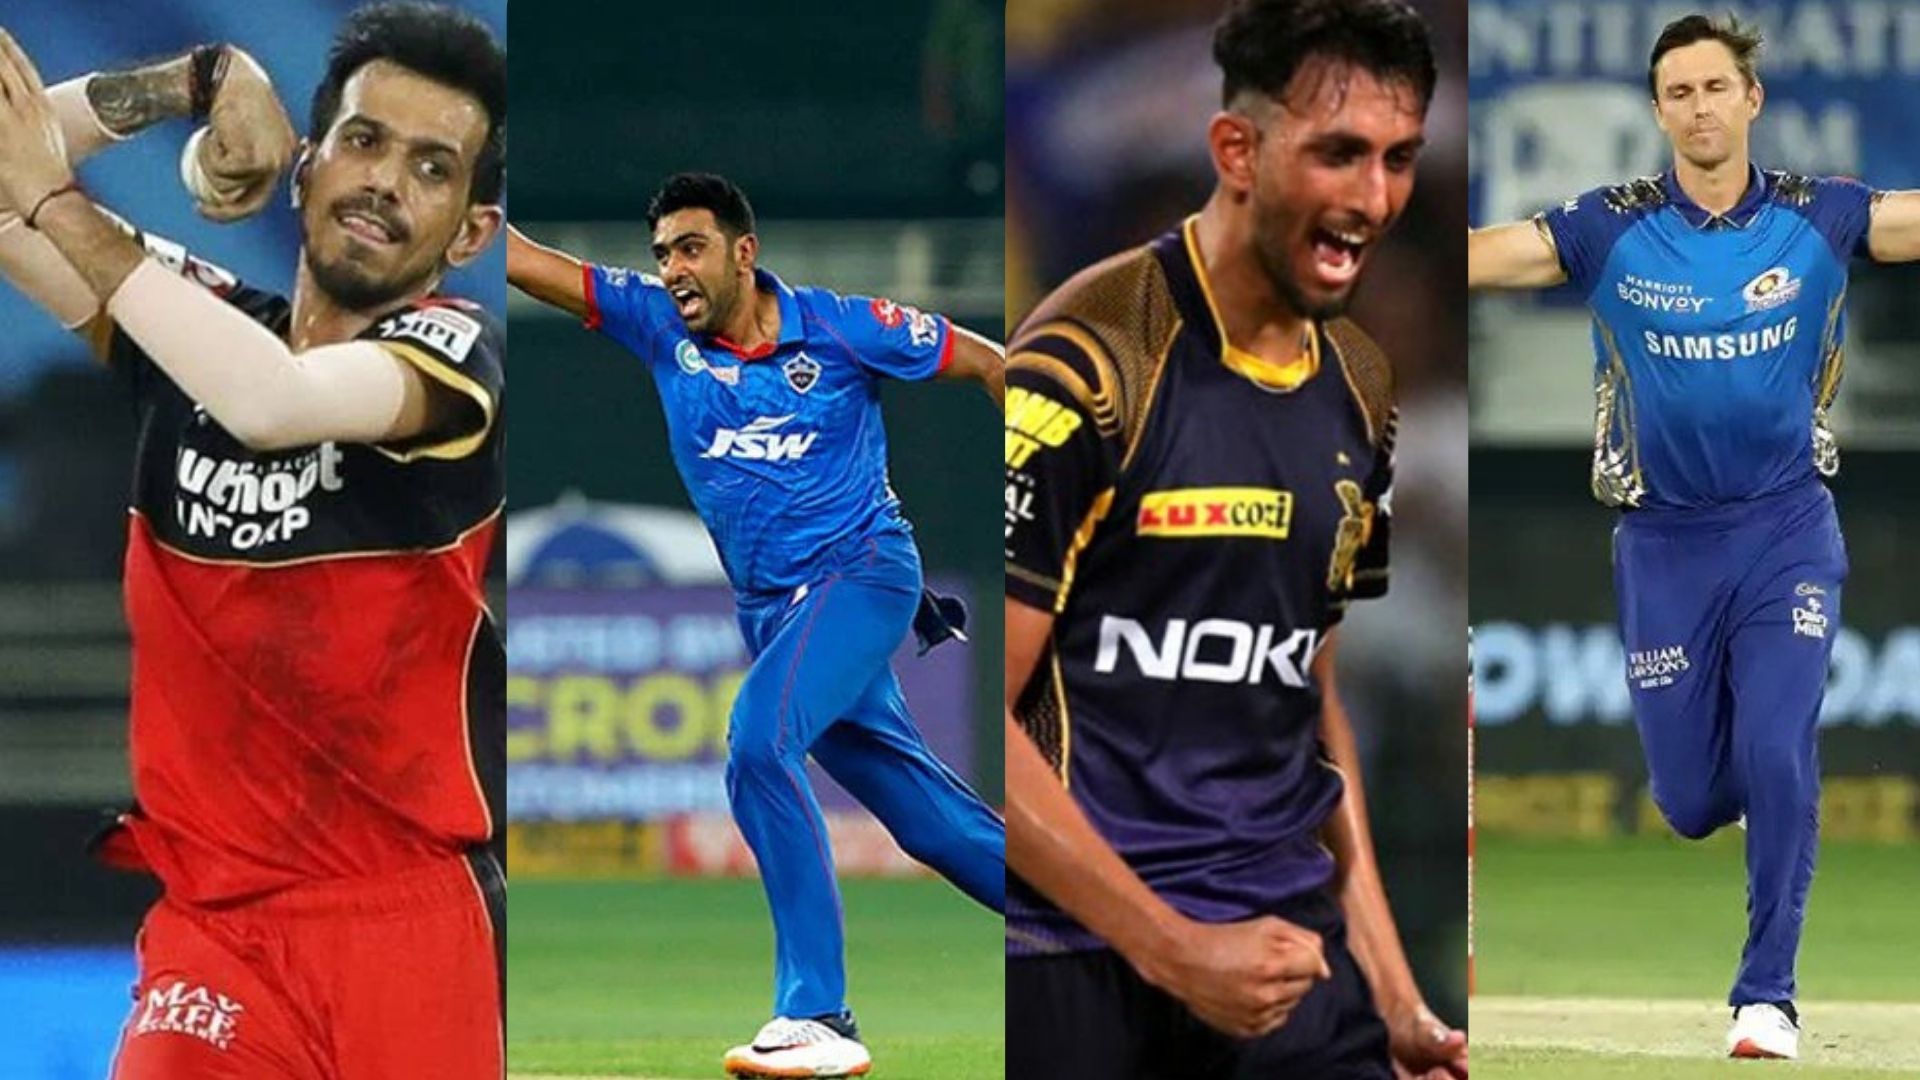 RR have added immense experience to their bowling attack ahead of IPL 2022